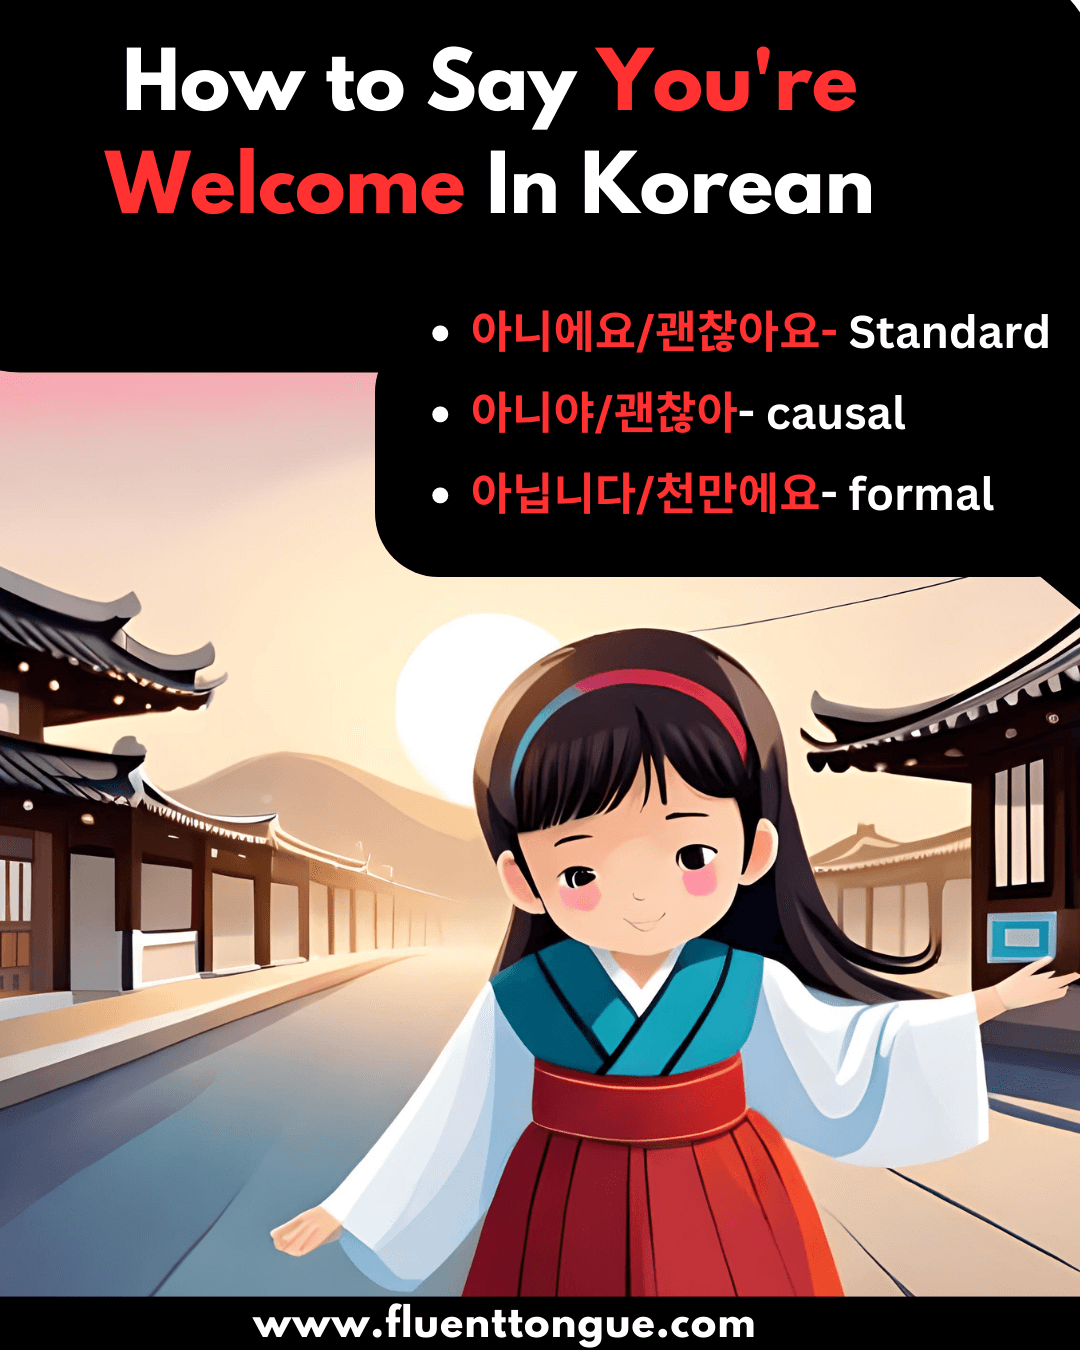 How to say you're welcome in Korean